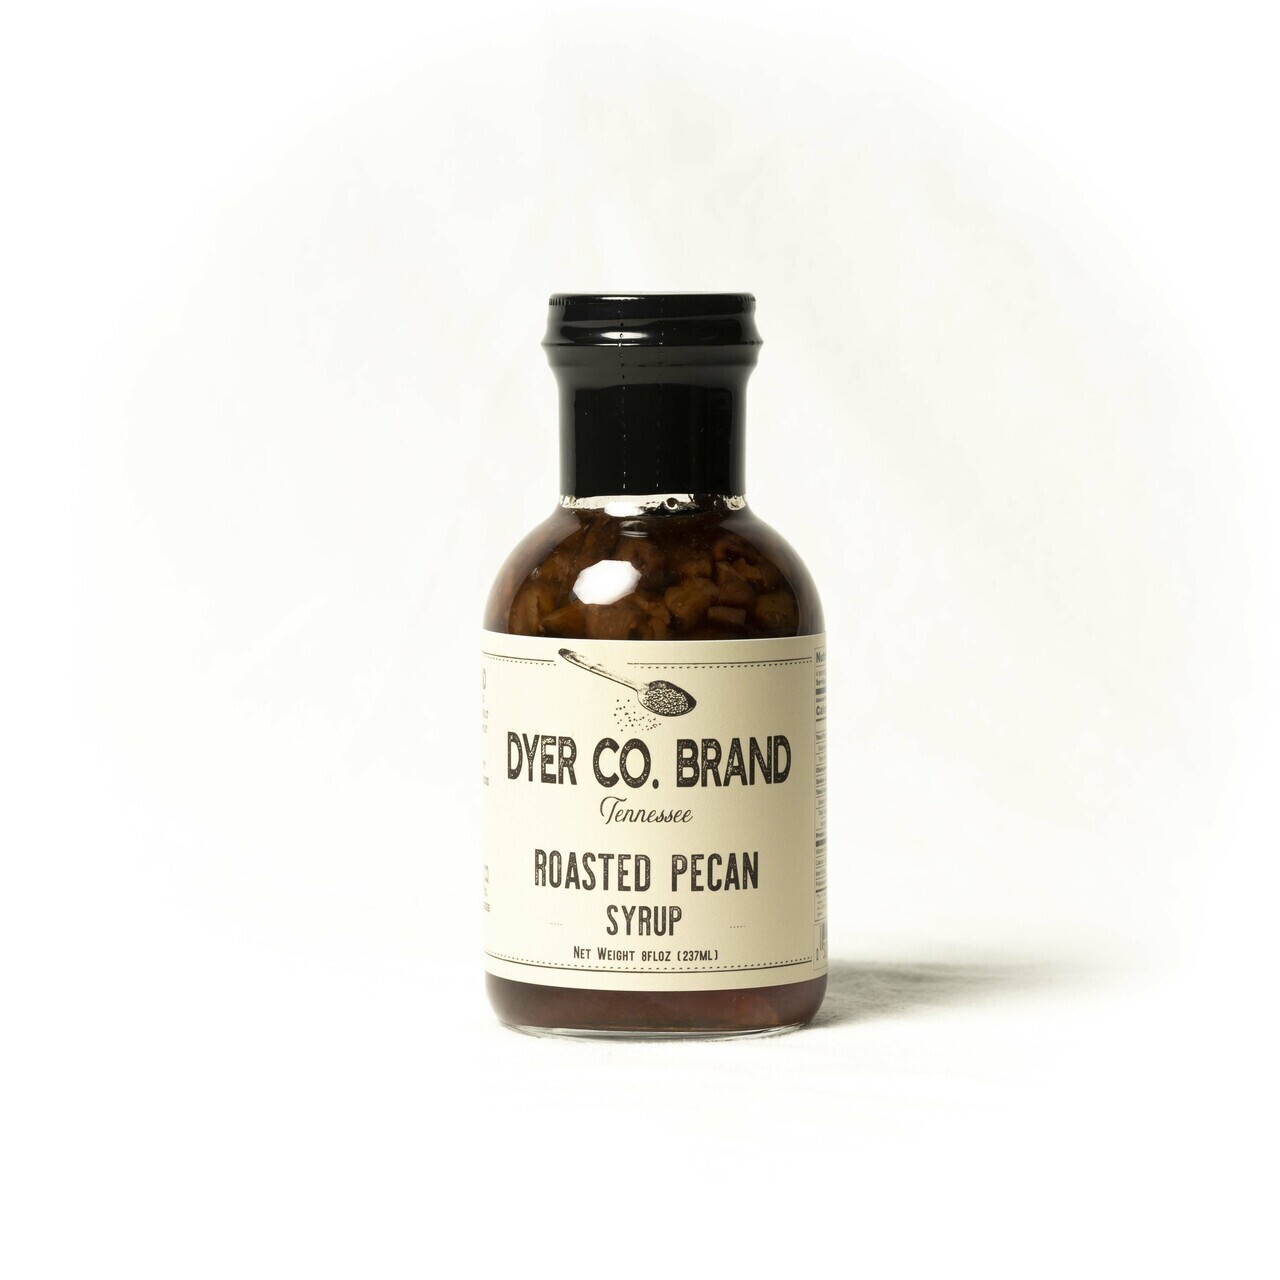 Dyer Co Brand Roasted Pecan Syrup- 8 oz